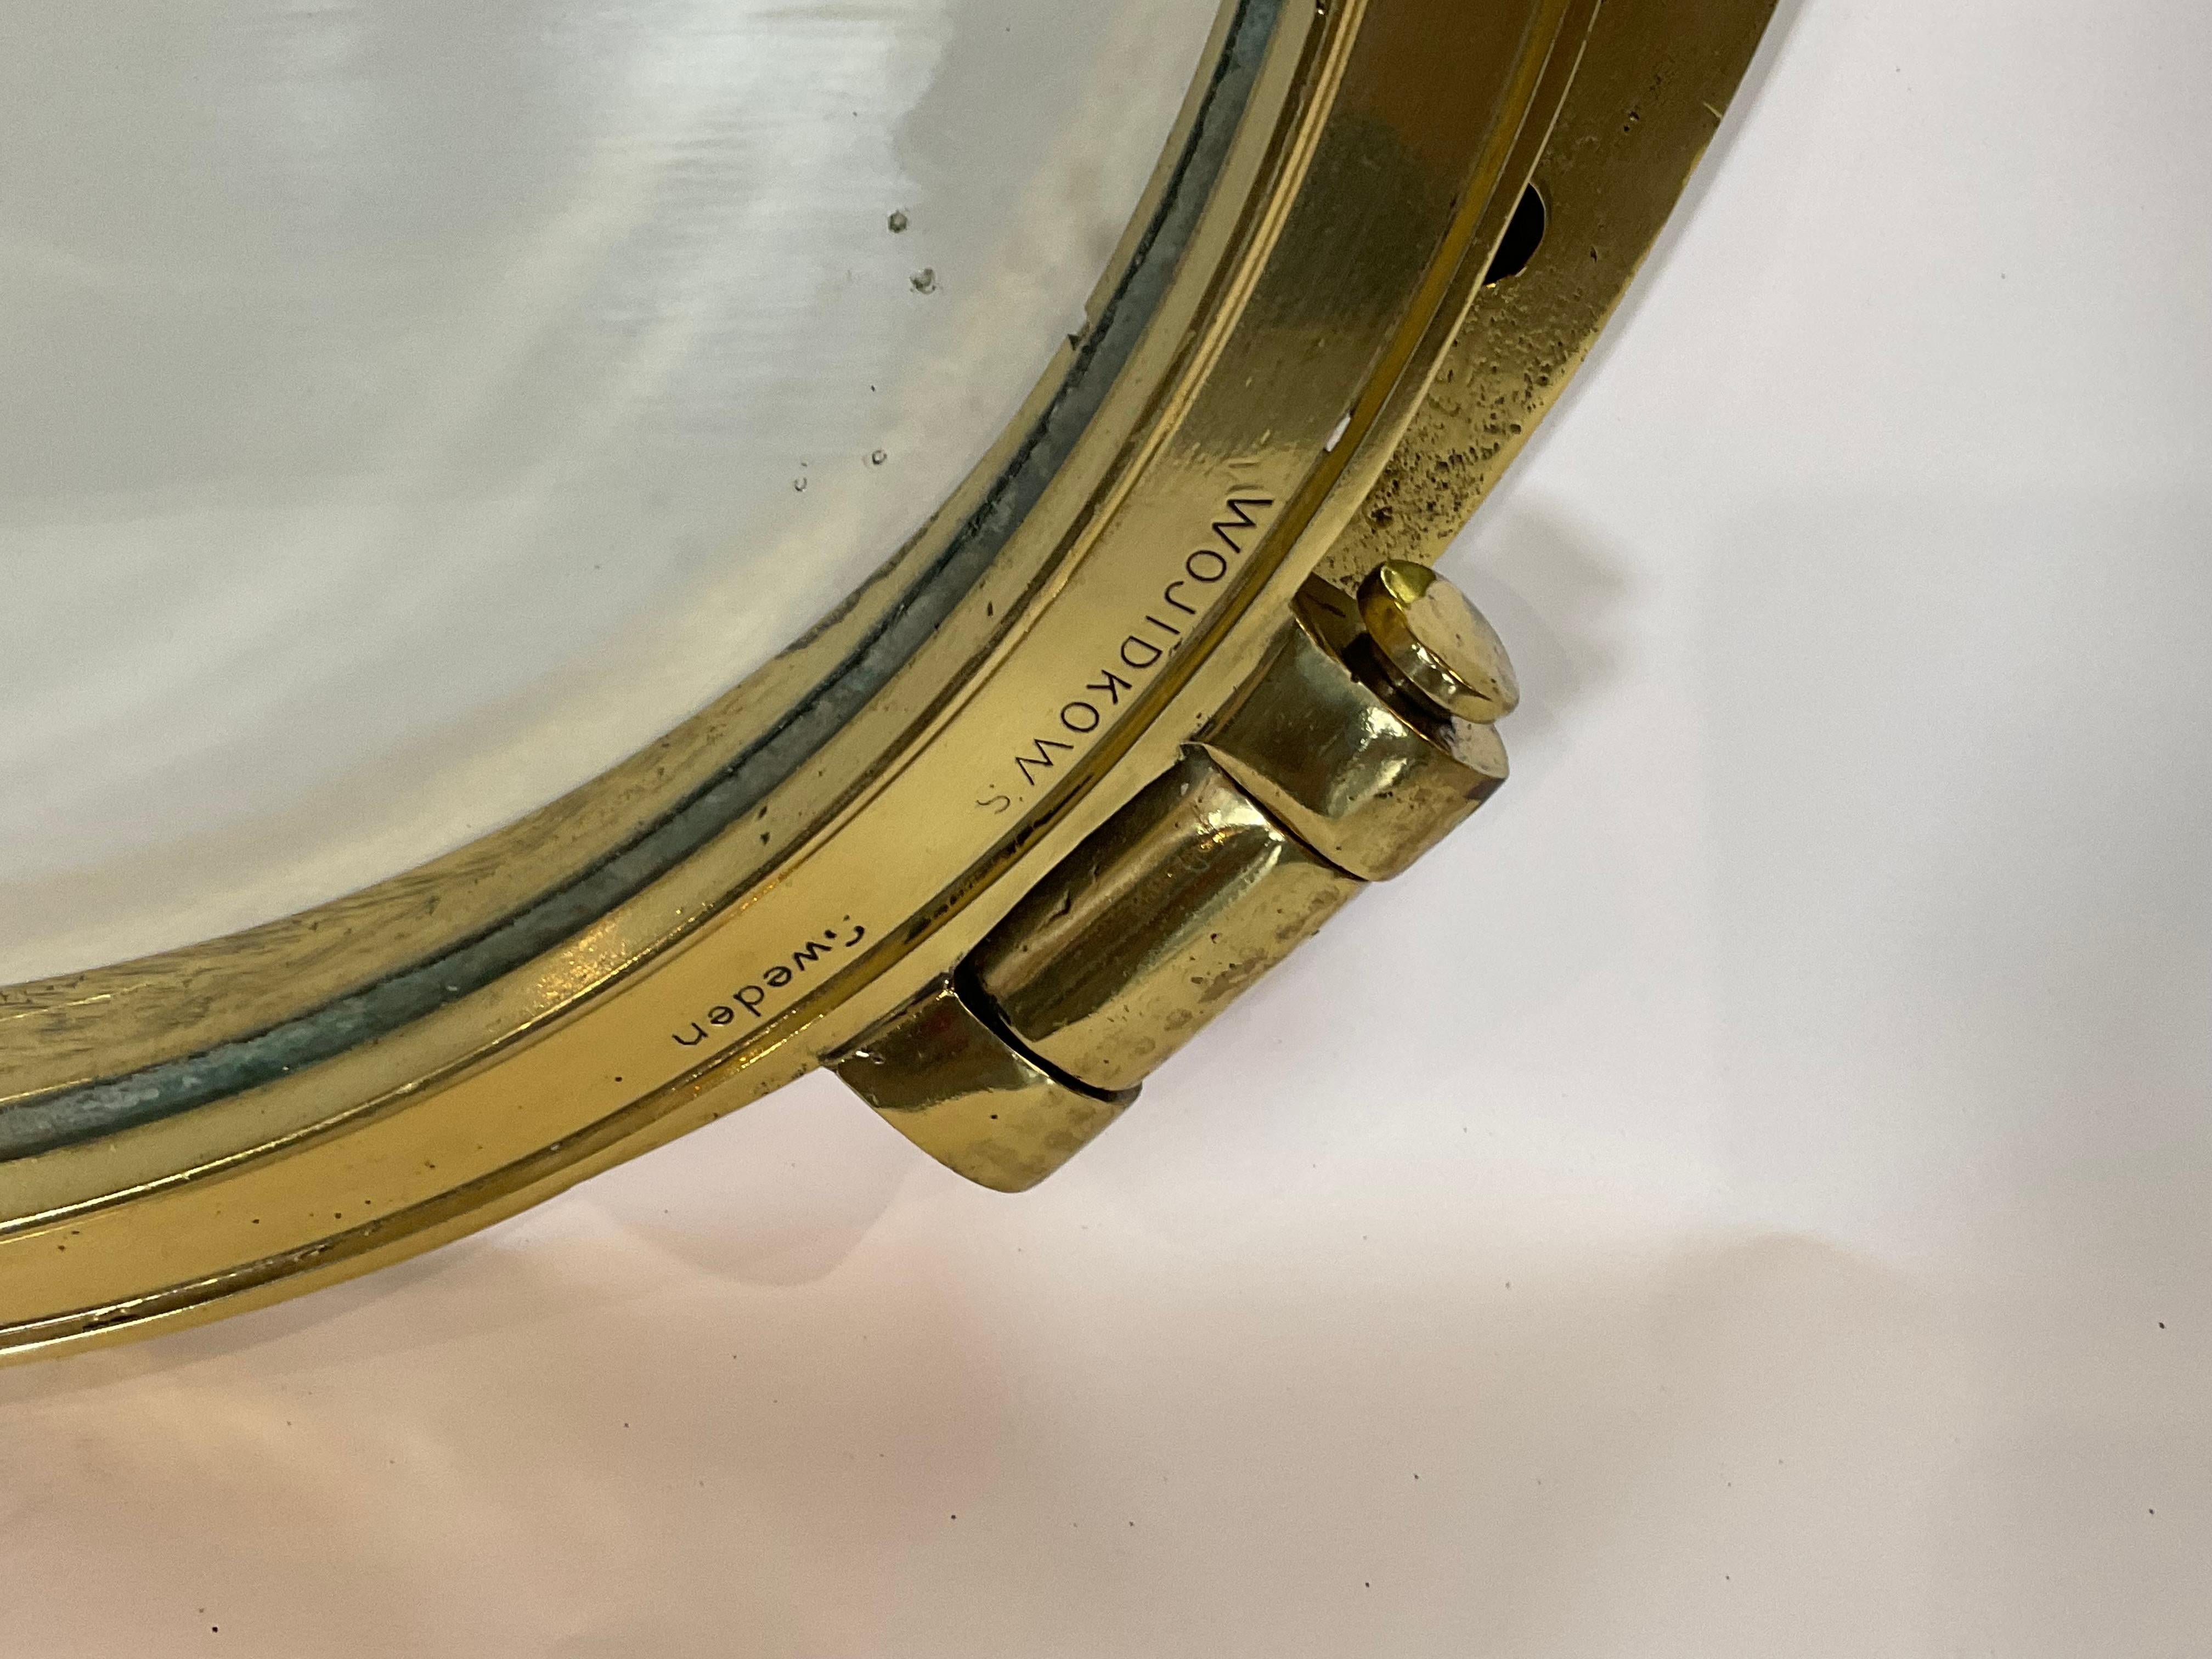 Mid-20th Century Solid Brass Ships Porthole Highly Polished with Lacquer Finish For Sale